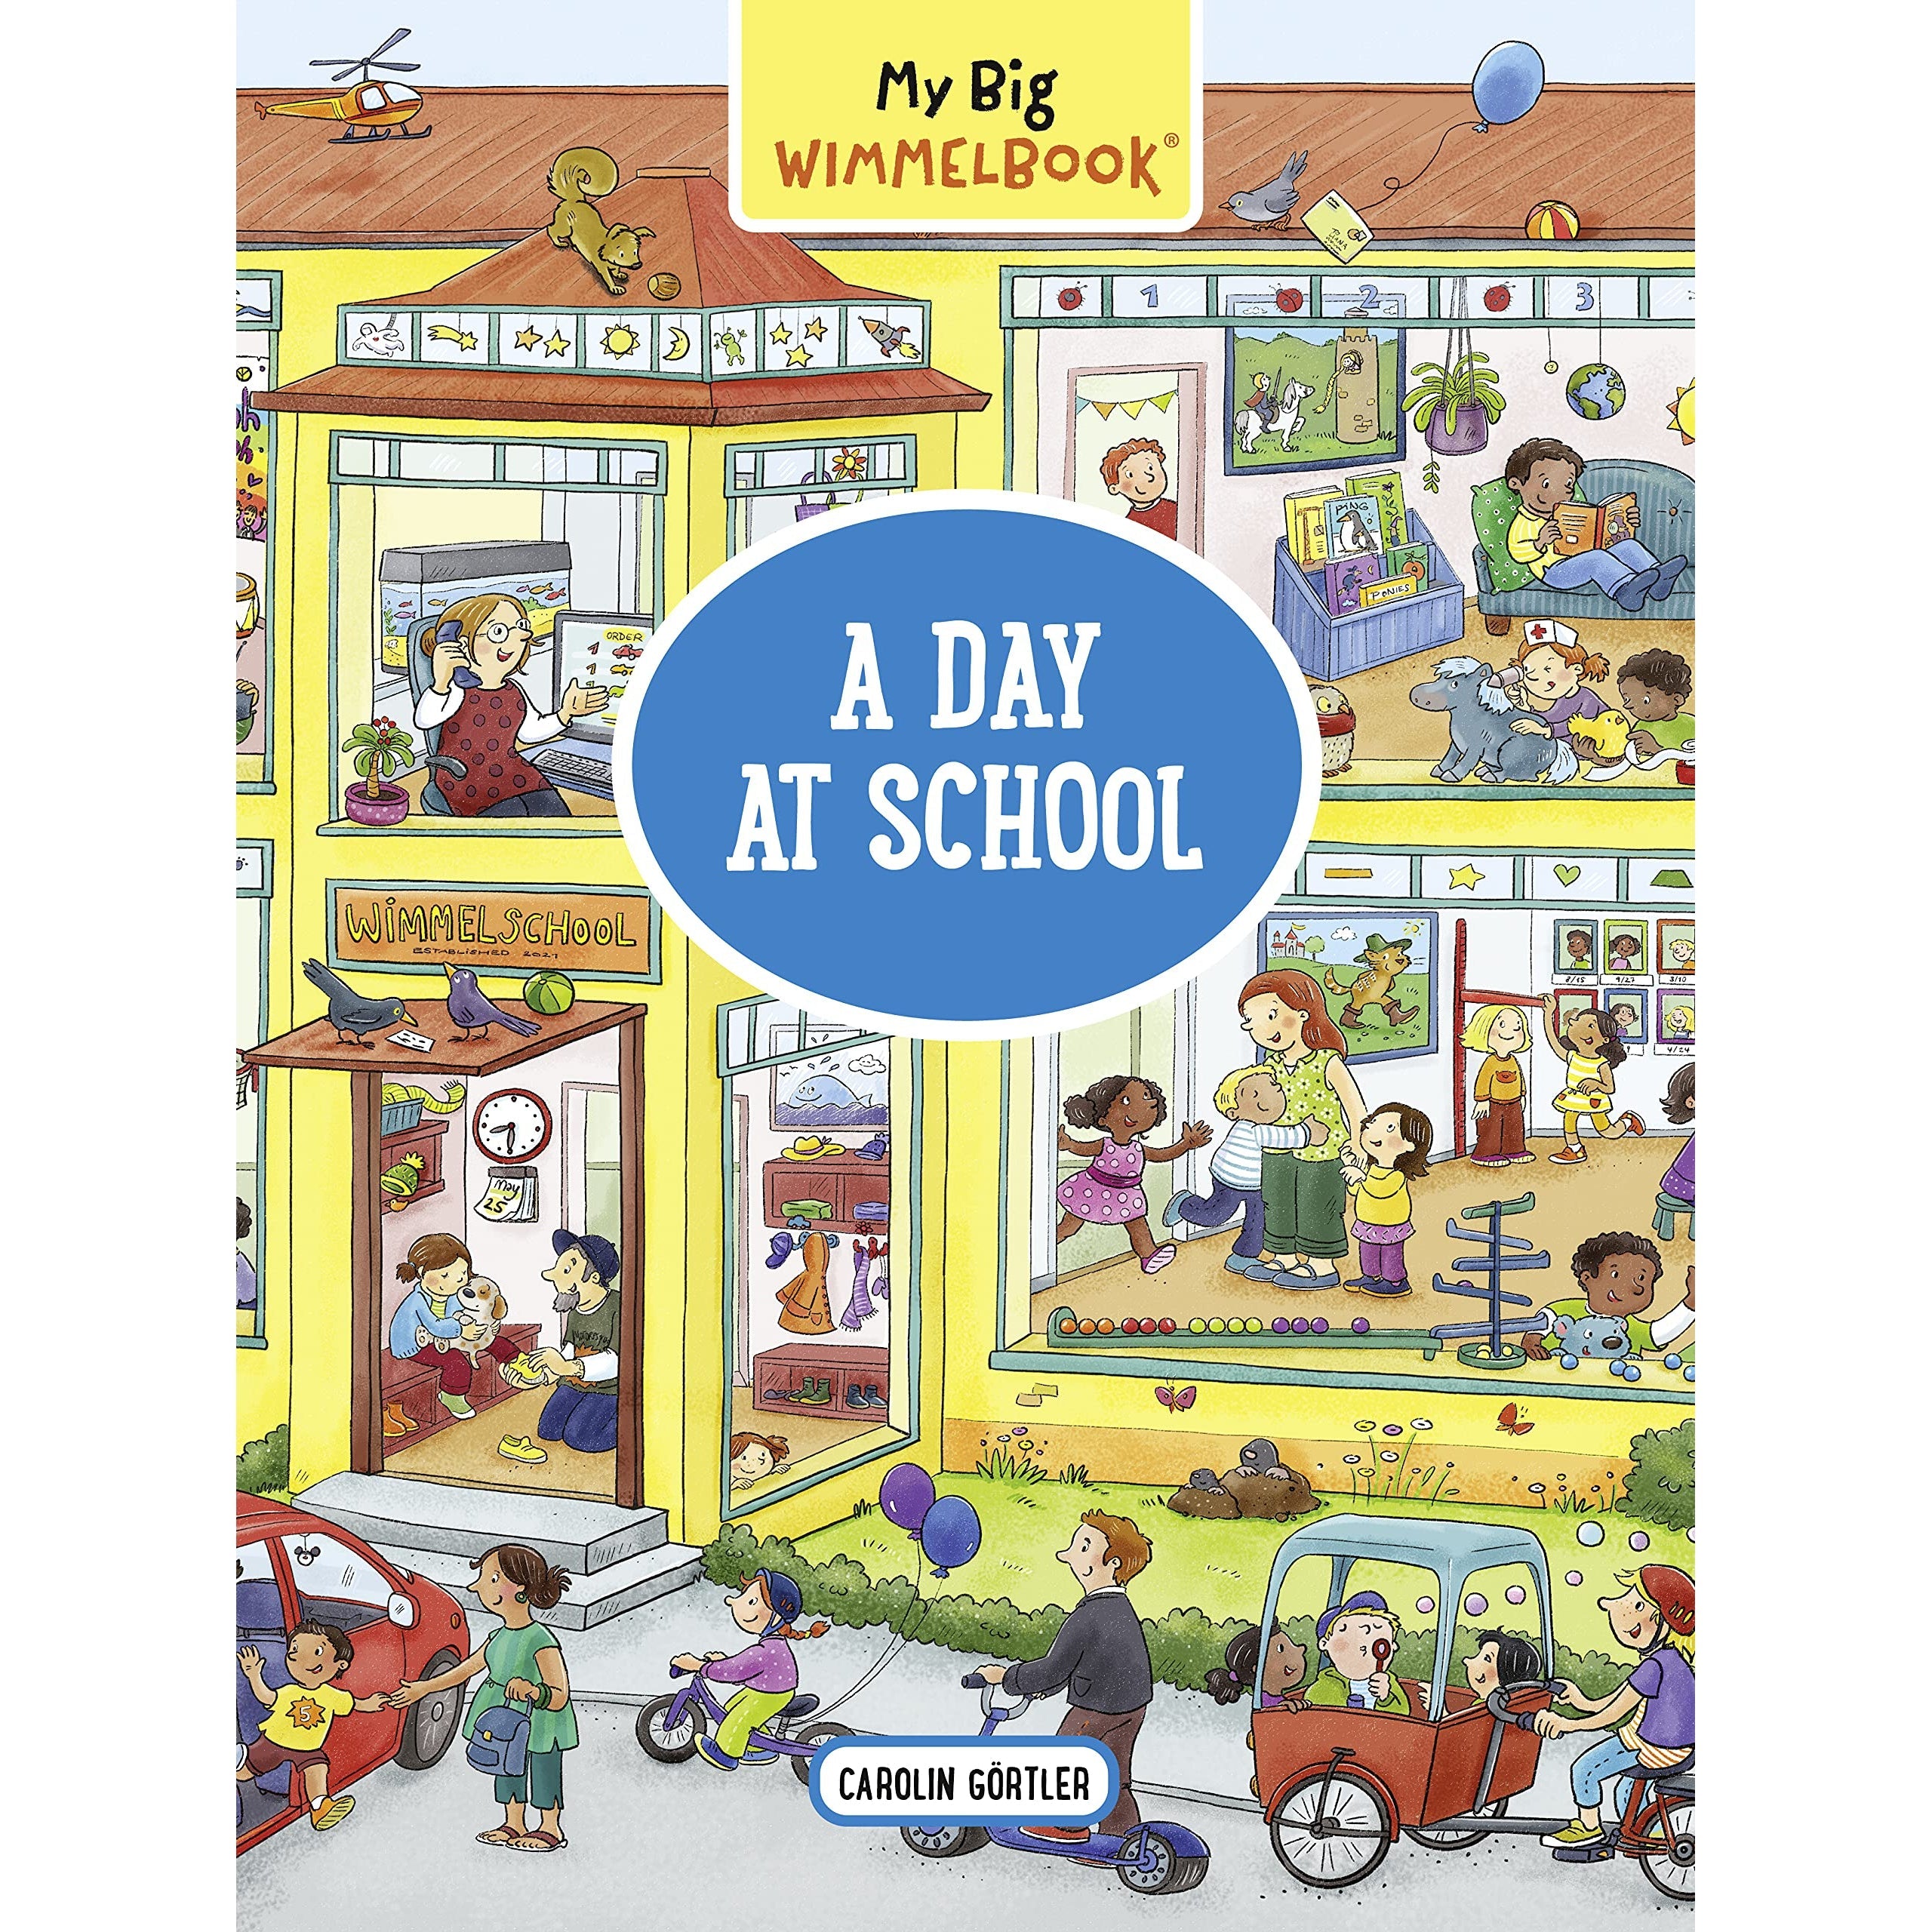 Hachette Book Group: My Big Wimmelbook - A Day at School-HACHETTE BOOK GROUP USA-Little Giant Kidz